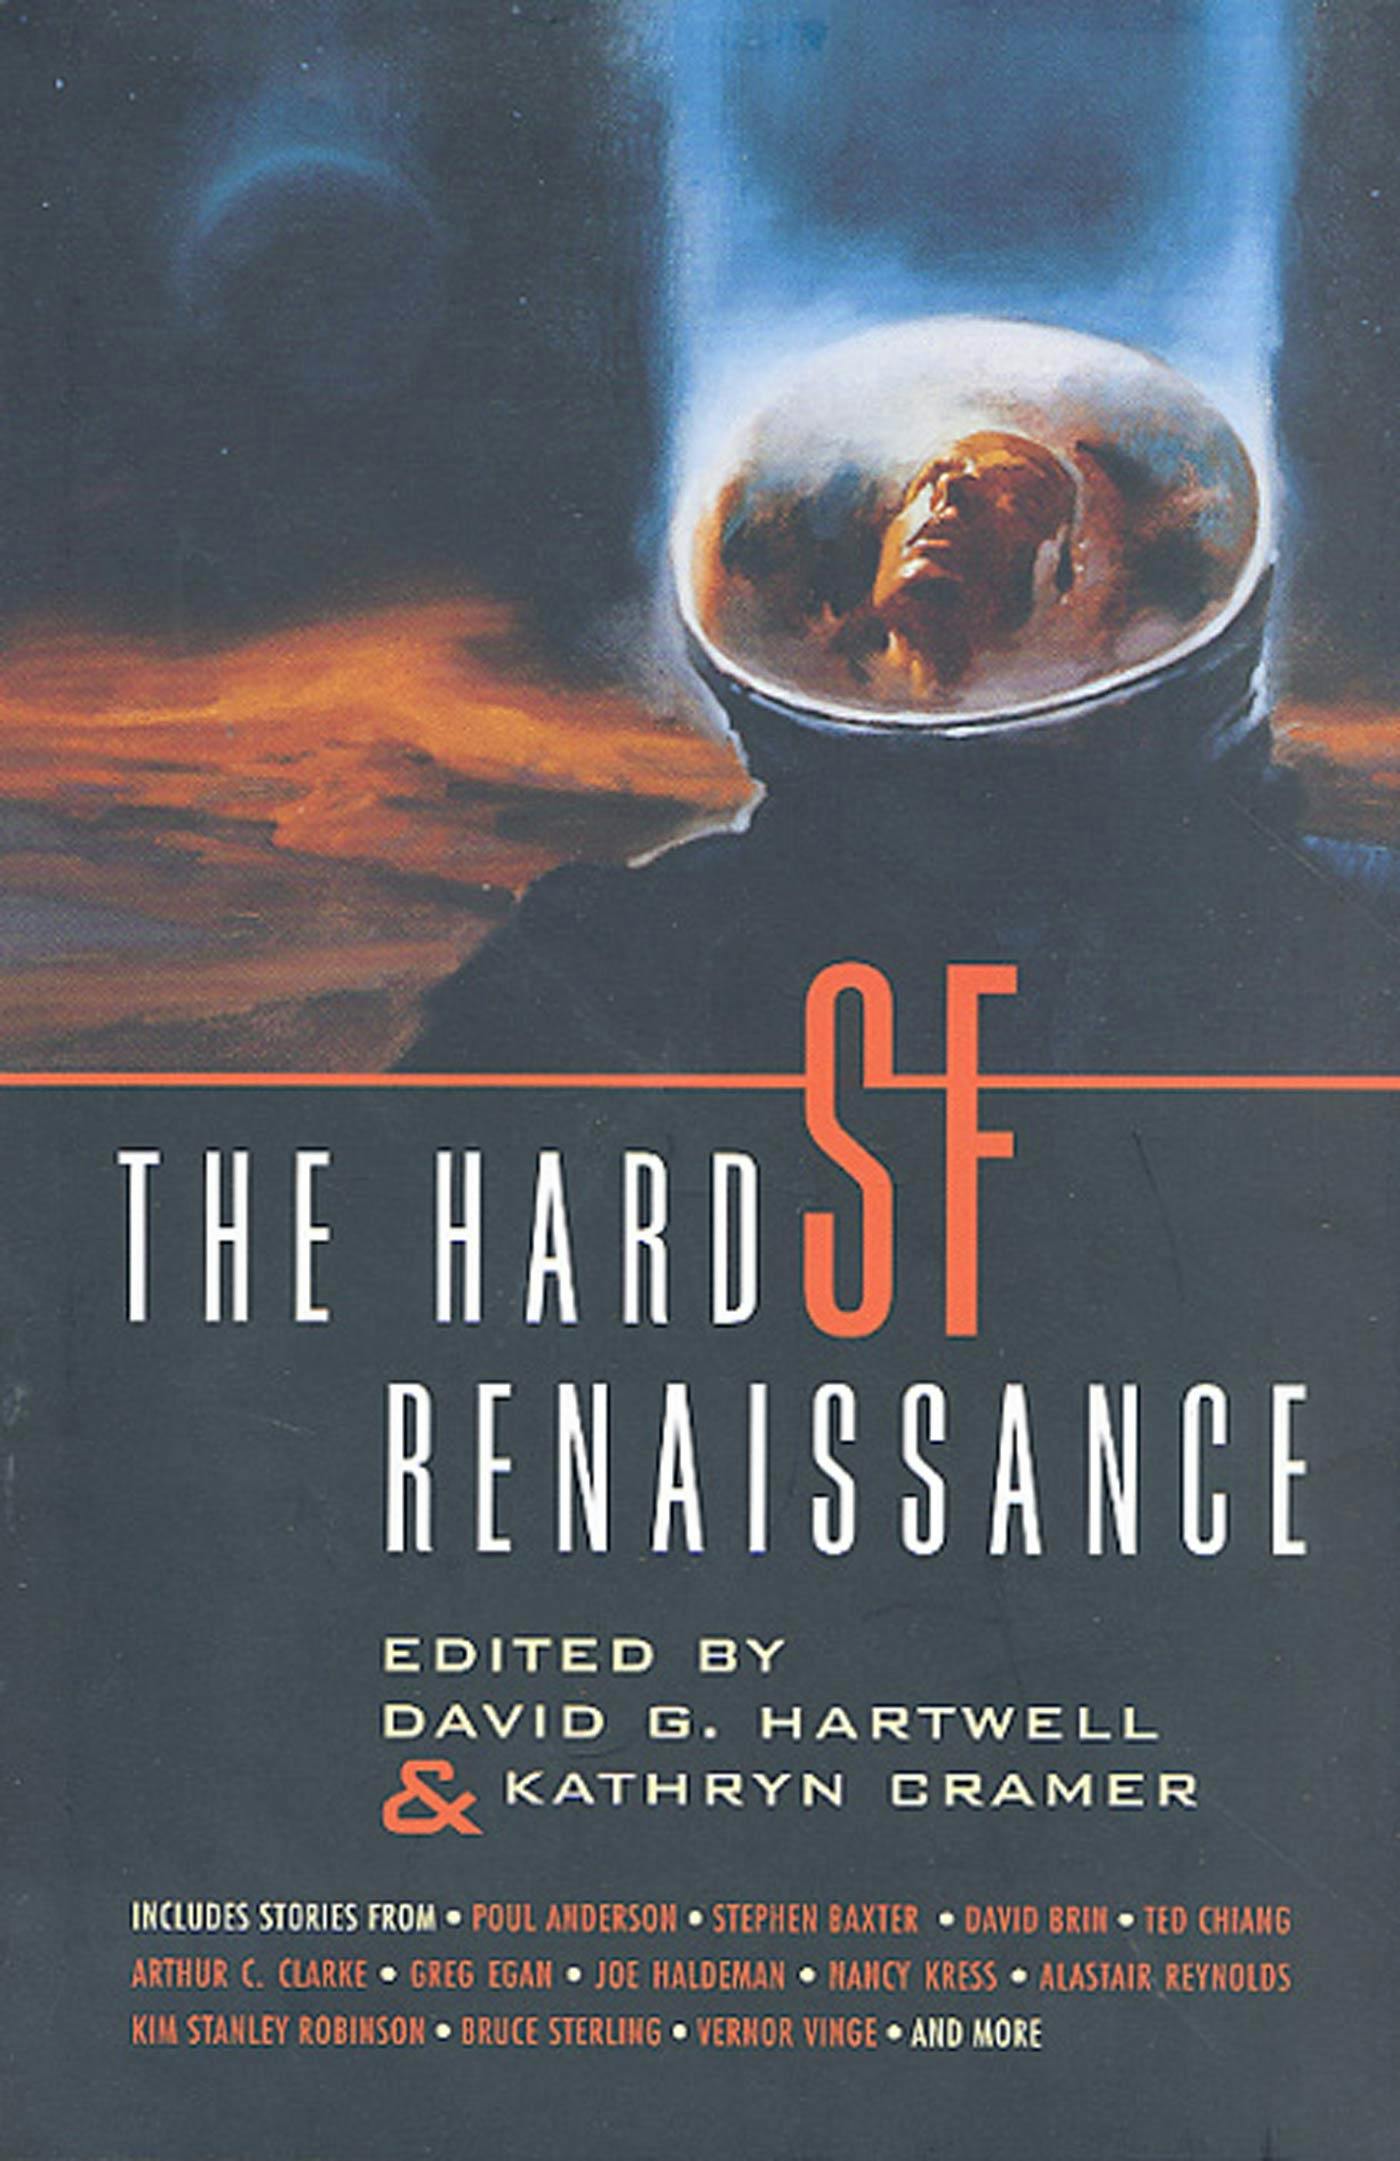 Cover for the book titled as: The Hard SF Renaissance